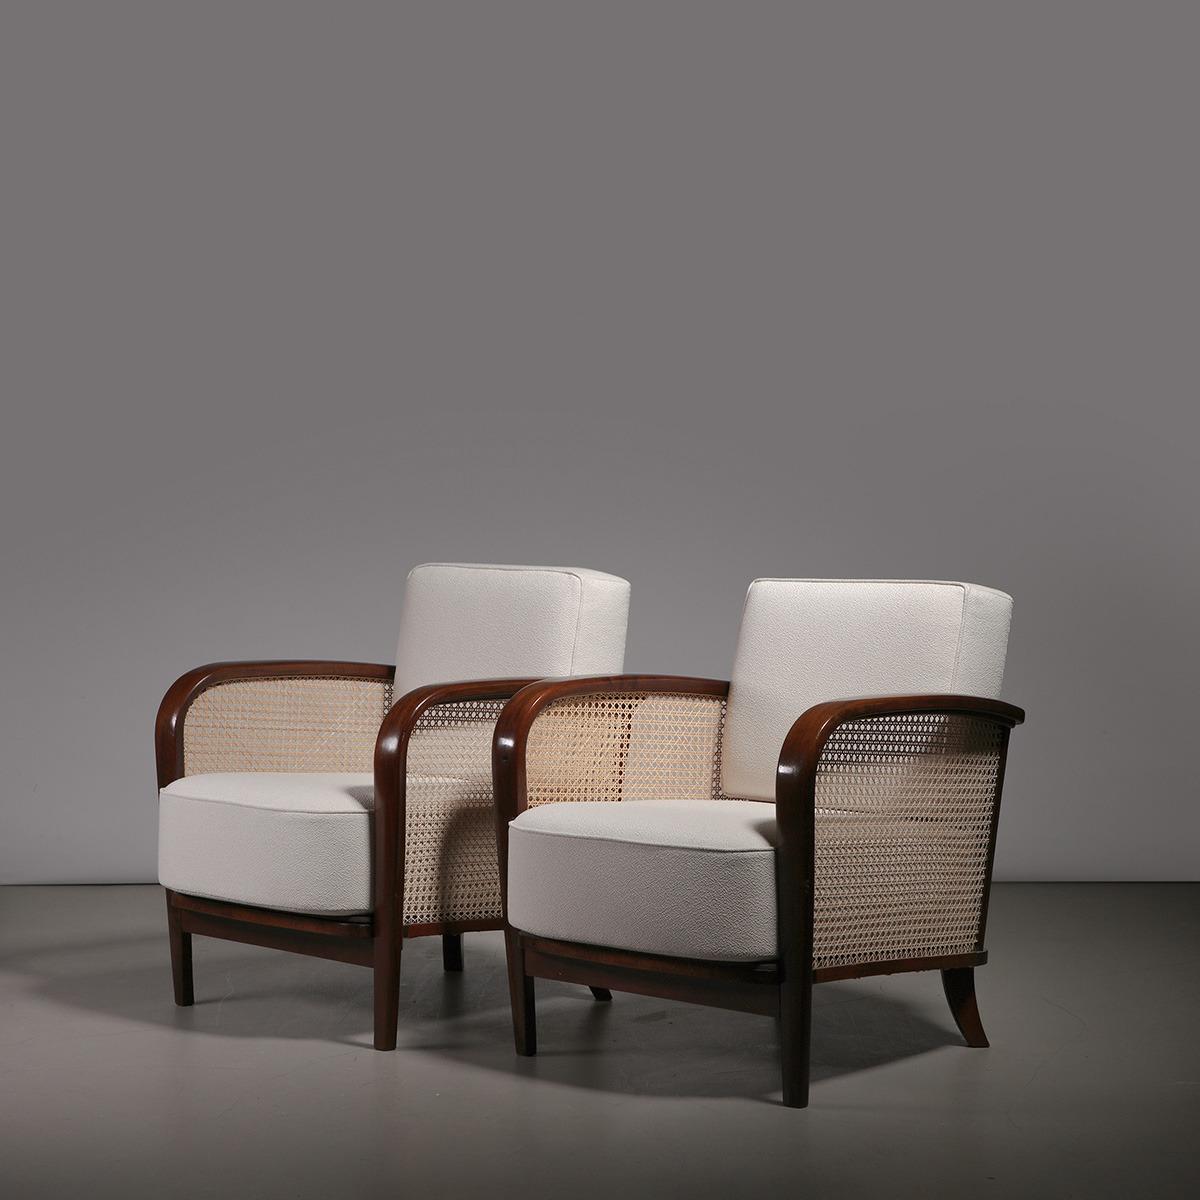 Rare pair of lounge chairs in walnut and white fabric upholstery, model H-319, designed by Jindřich Halabala and manufactured by UP závody in former Czechoslovakia, 1920s.

One of the rarest armchair models by the renowned Czech designer, the H-319